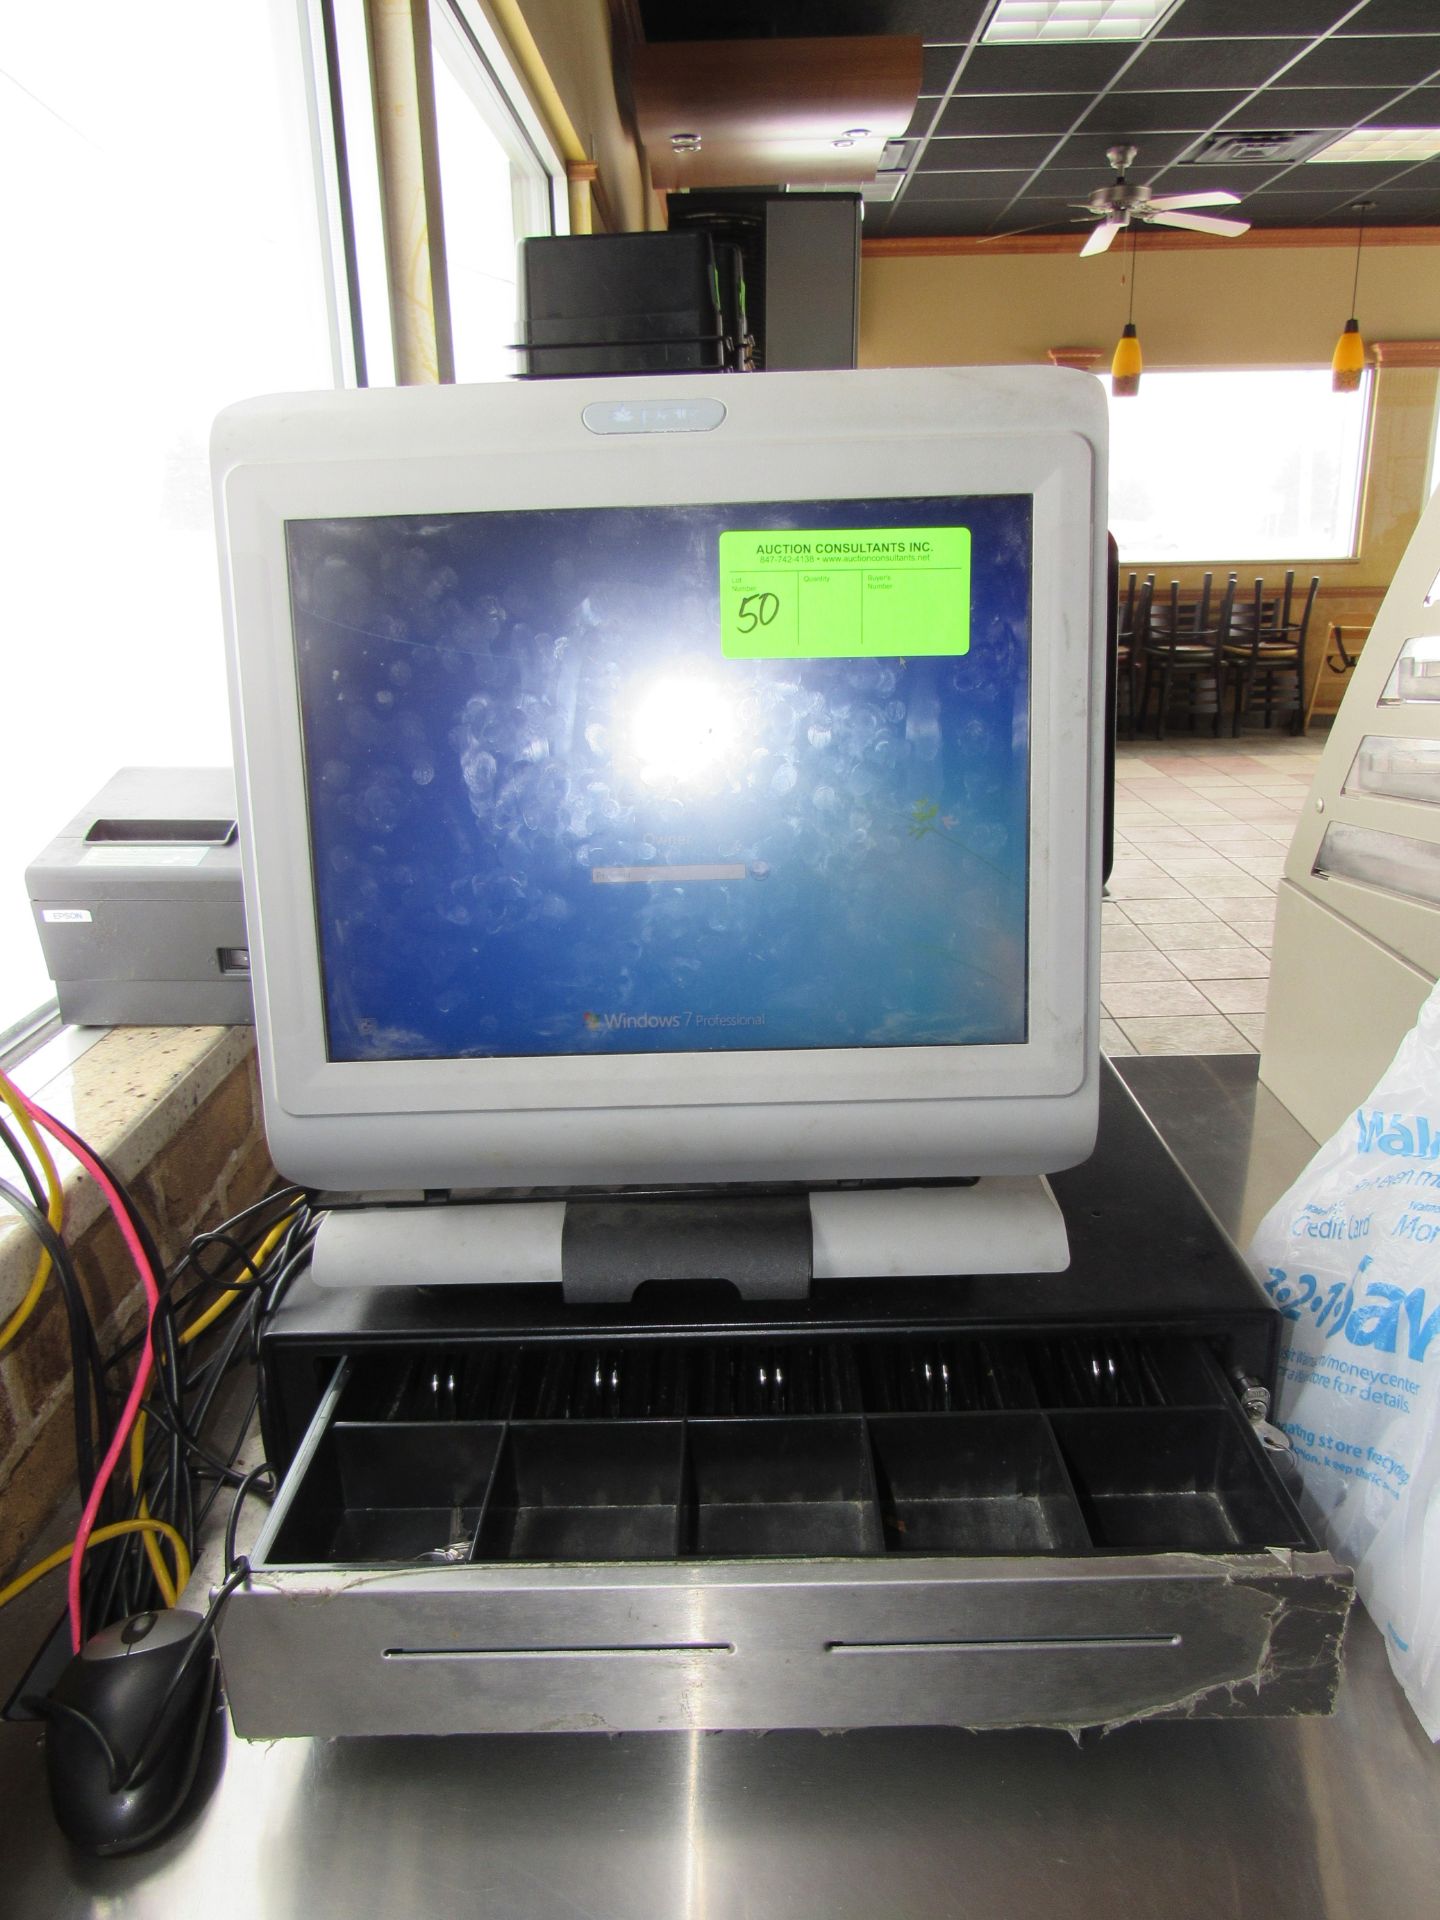 Par touchscreen POS System with Cashdrawer Printer keyboard and monitor